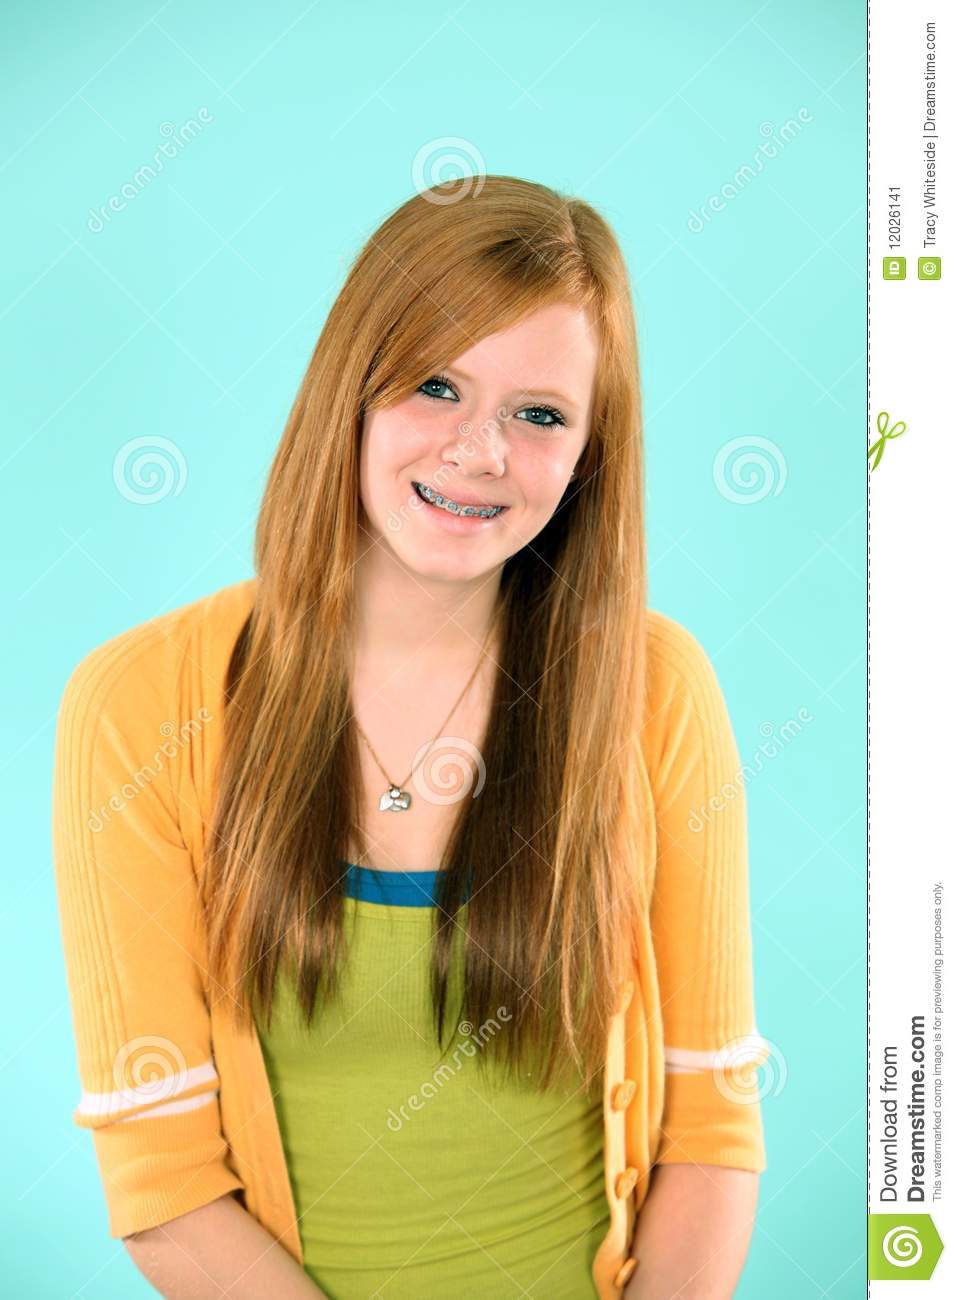 Honey reccomend Redhead girls with braces